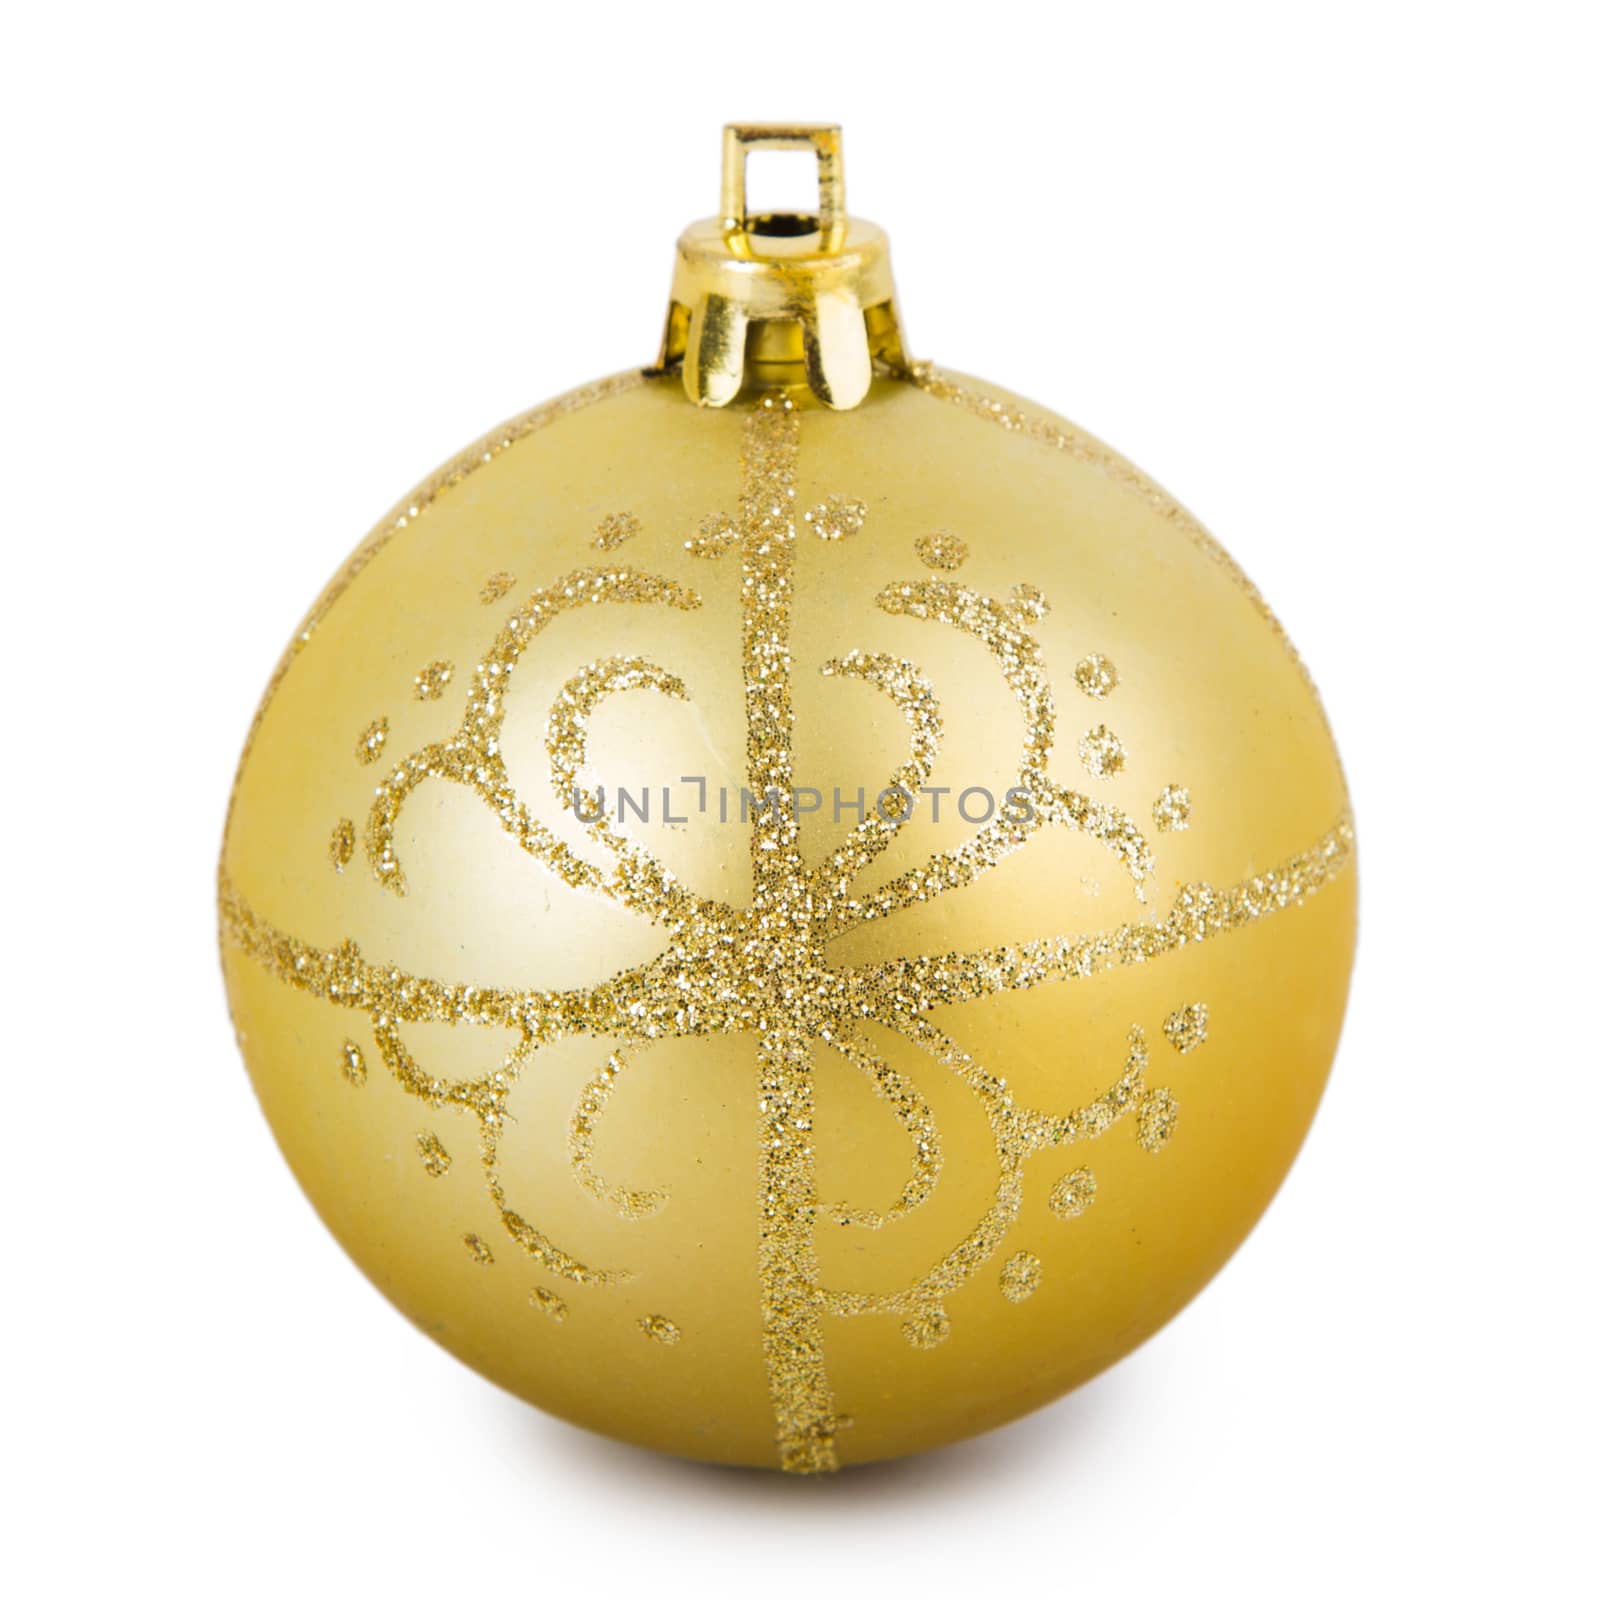 Gold Christmas ball isolated on a white background